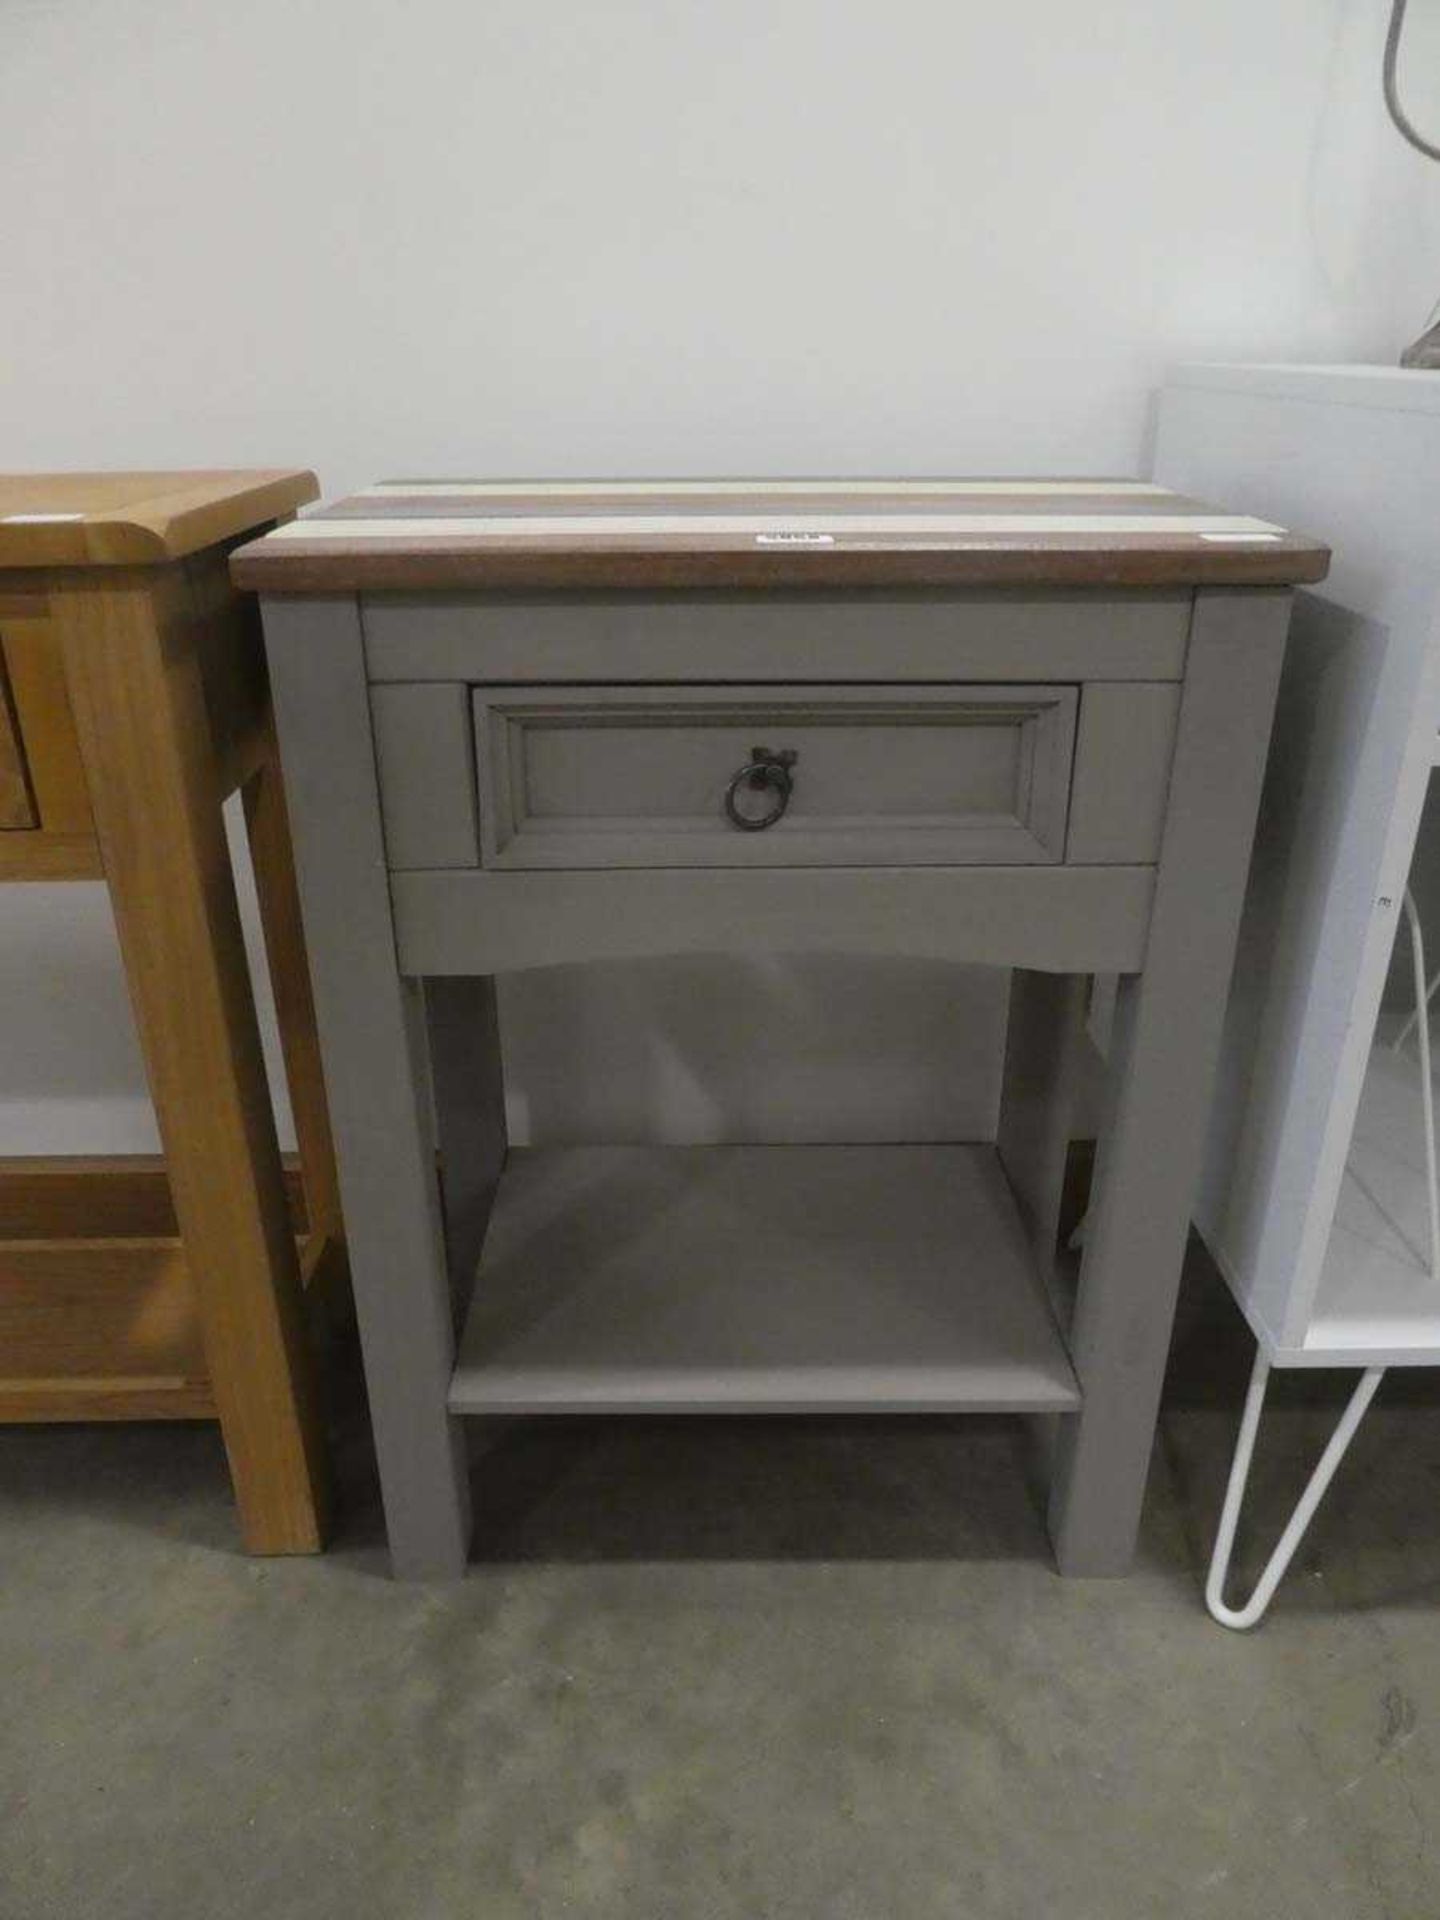 Grey painted side table with drawer and shelf under